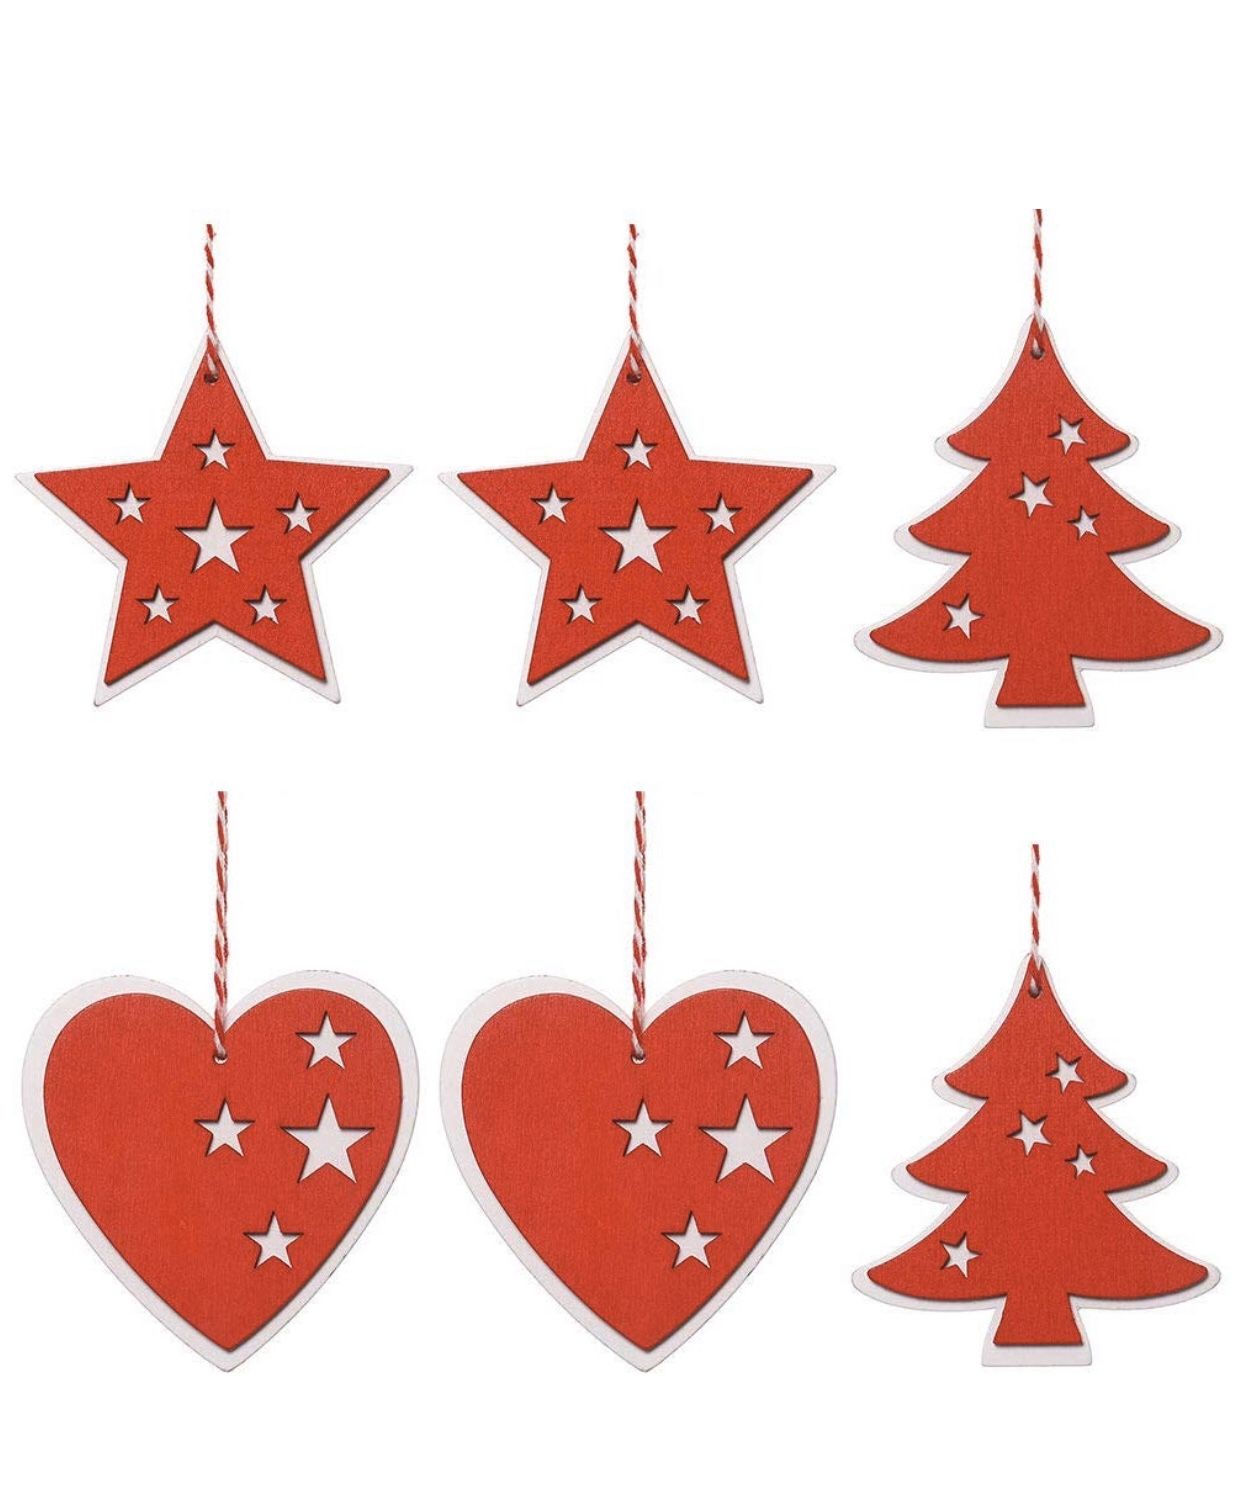 6 Pc Christmas Decorations Wooden Ornament Xmas Tree Hanging Tags Pendant (red-White)